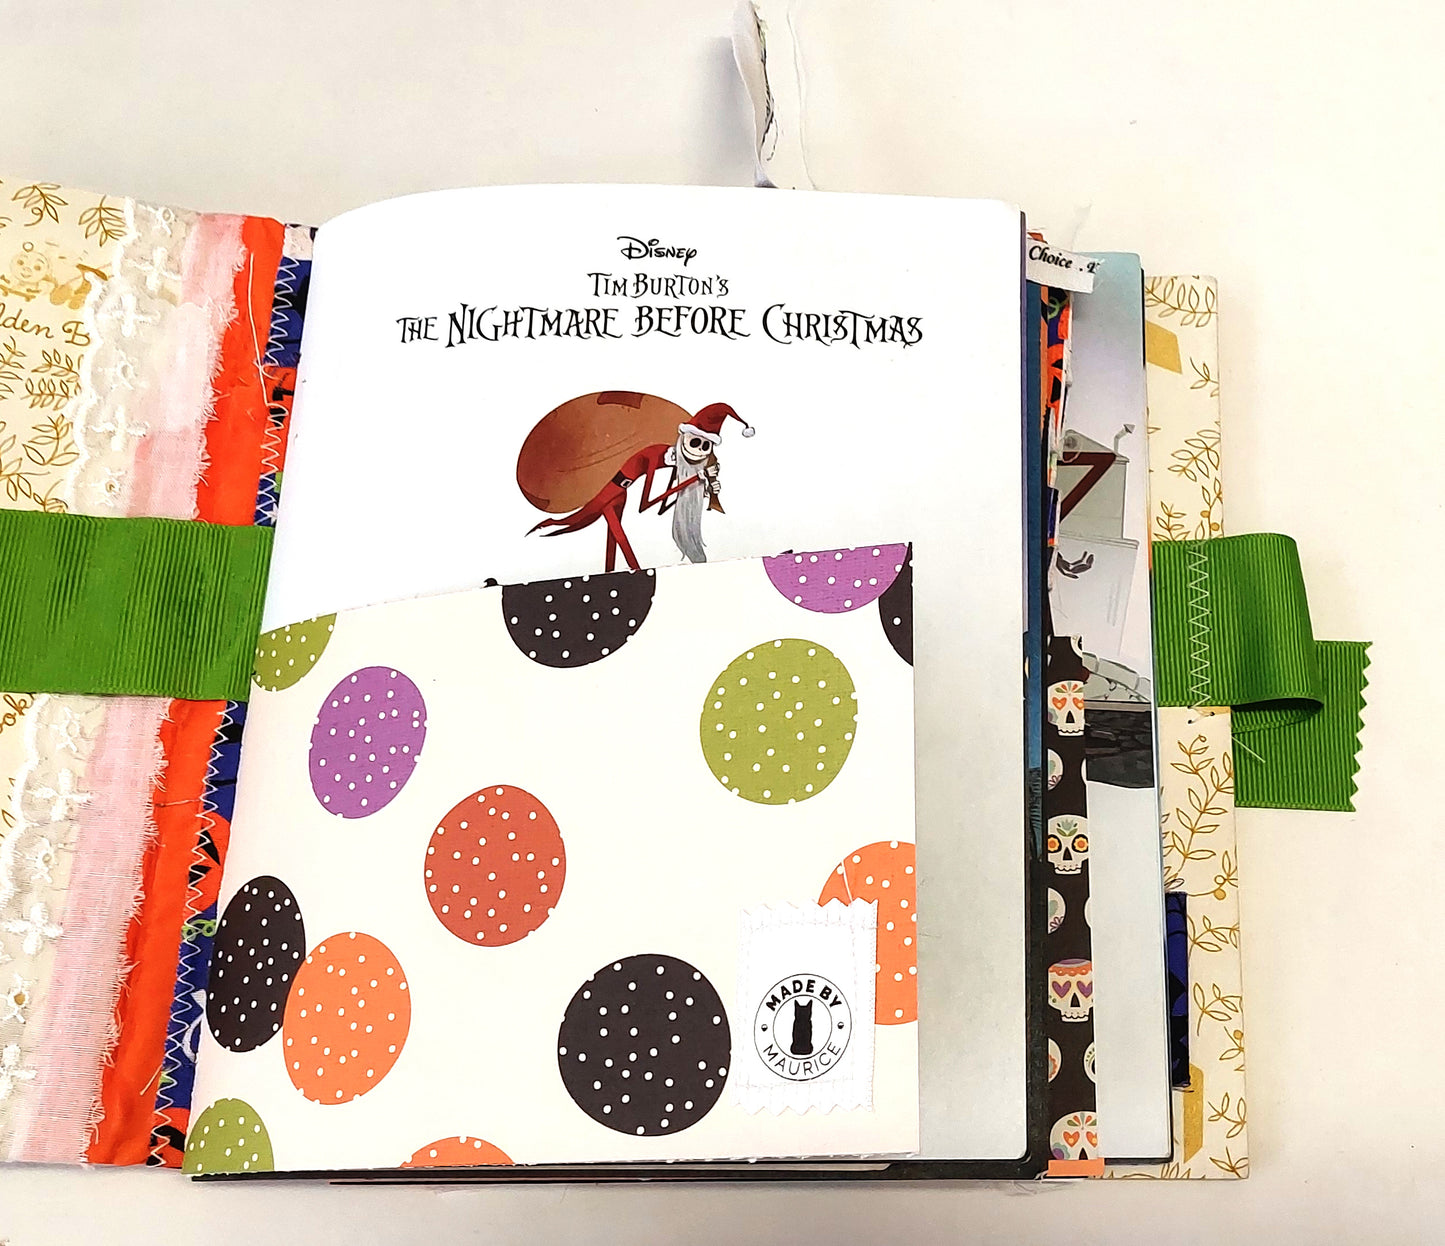 The Nightmare Before Christmas Halloween Themed (LGB) Hardcover Junk Journal